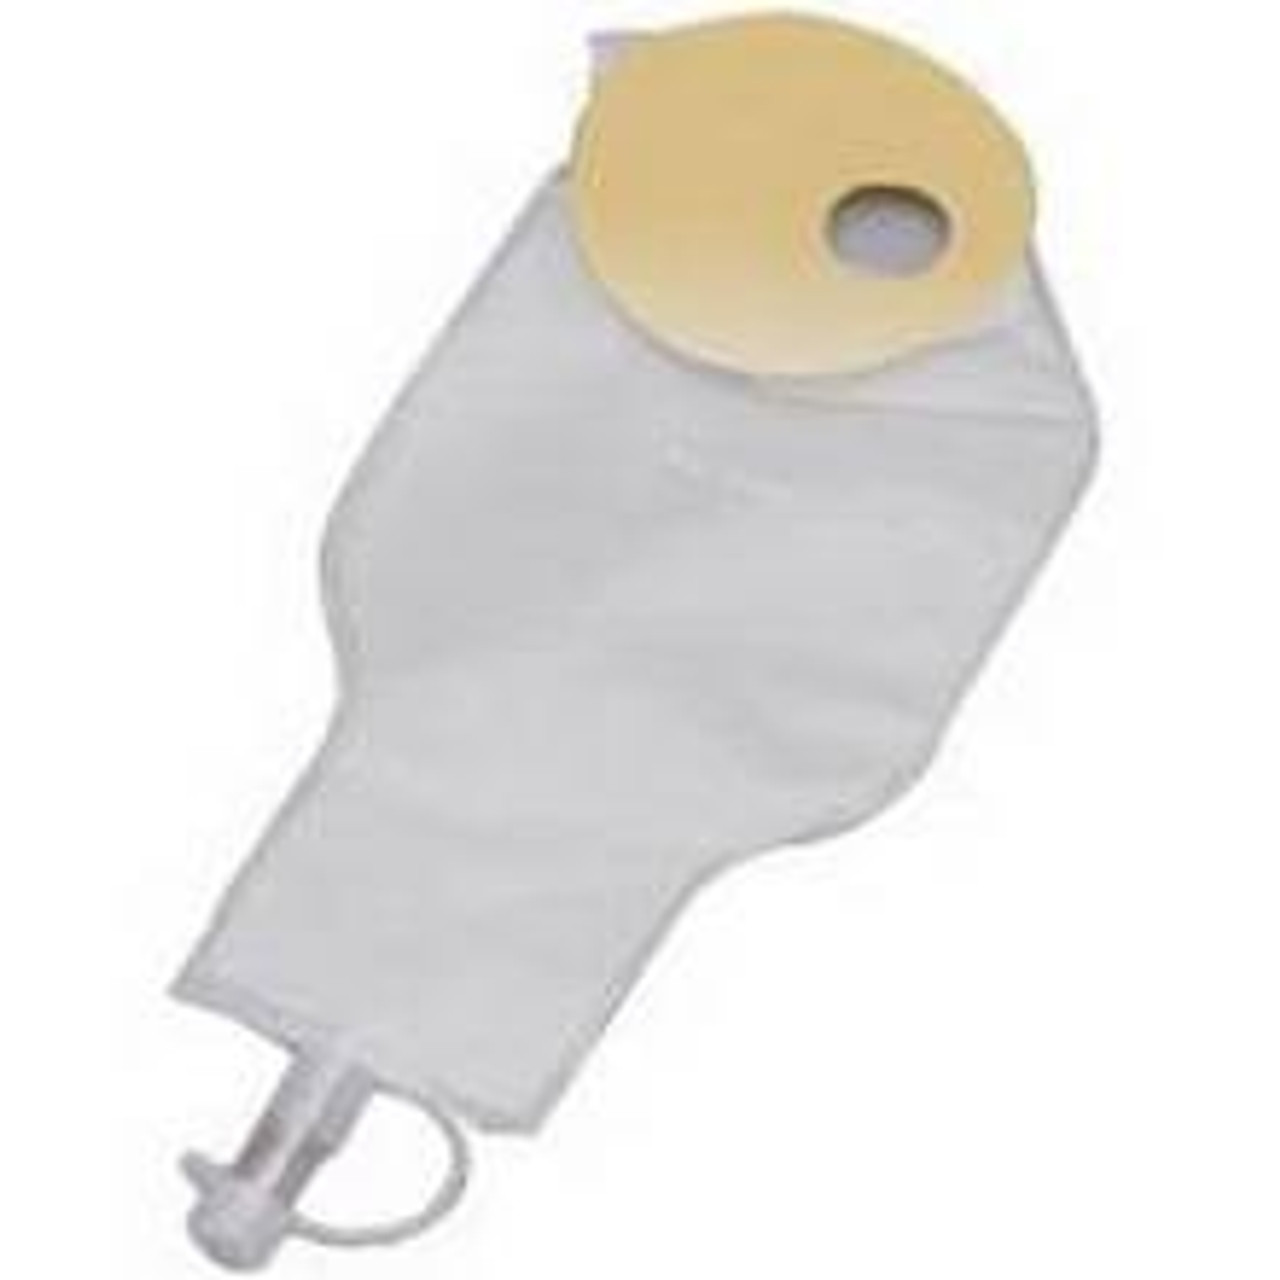 Drainable Fecal INCONTINENCE Collector W/Barrier BX/10 (HOL-9821)